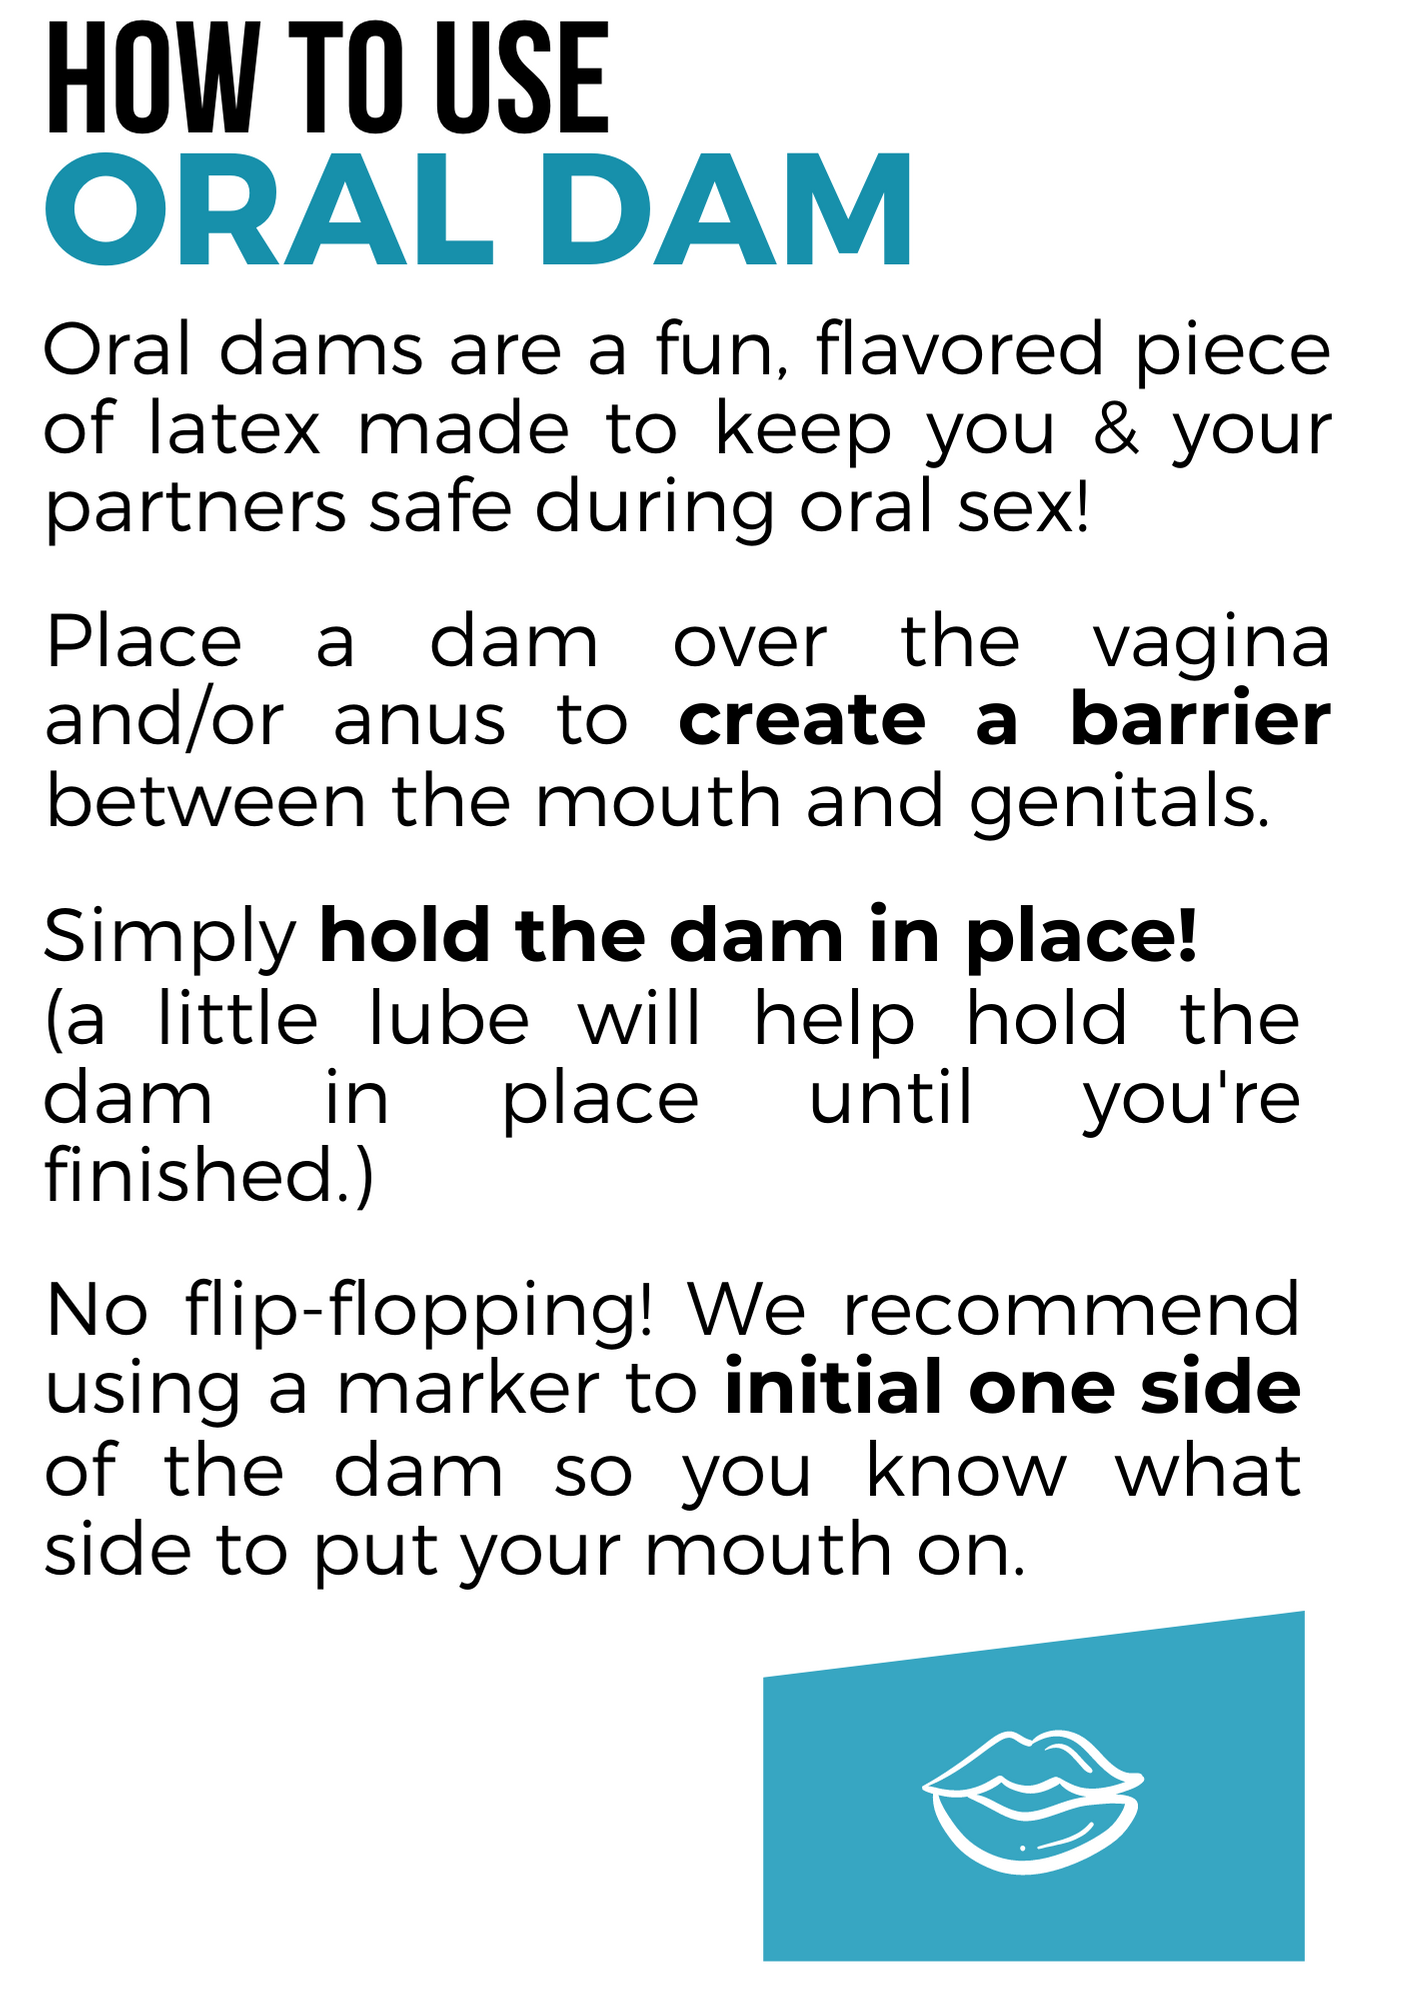 how to use an oral dam instructions